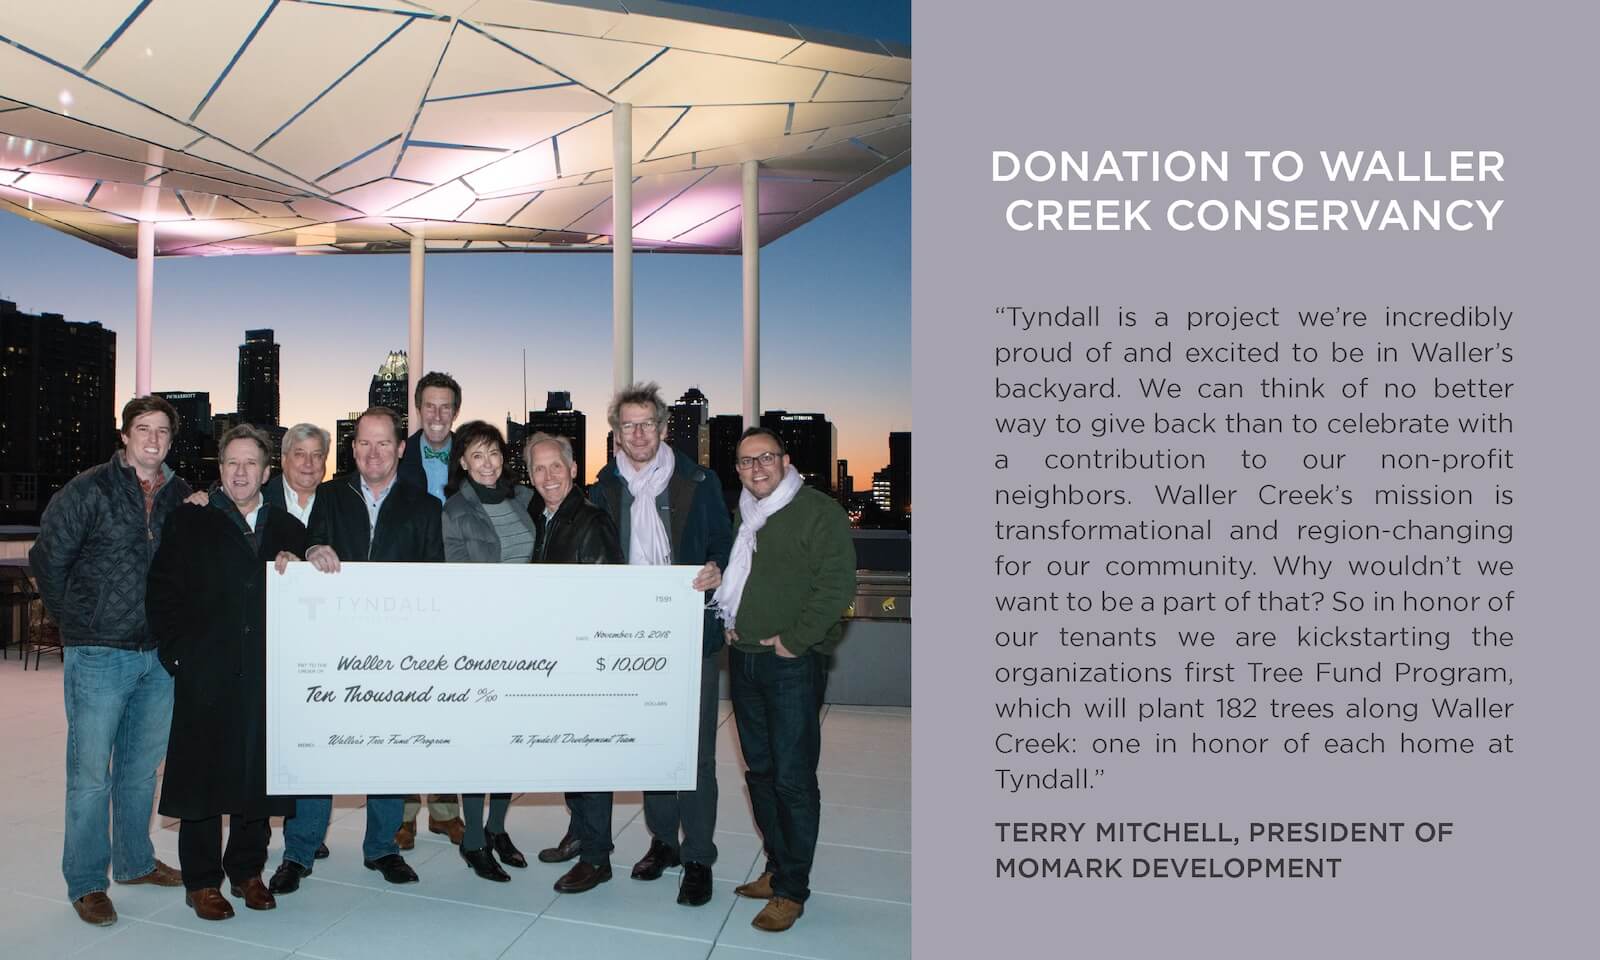 Tyndall Grand Opening event donation presentation